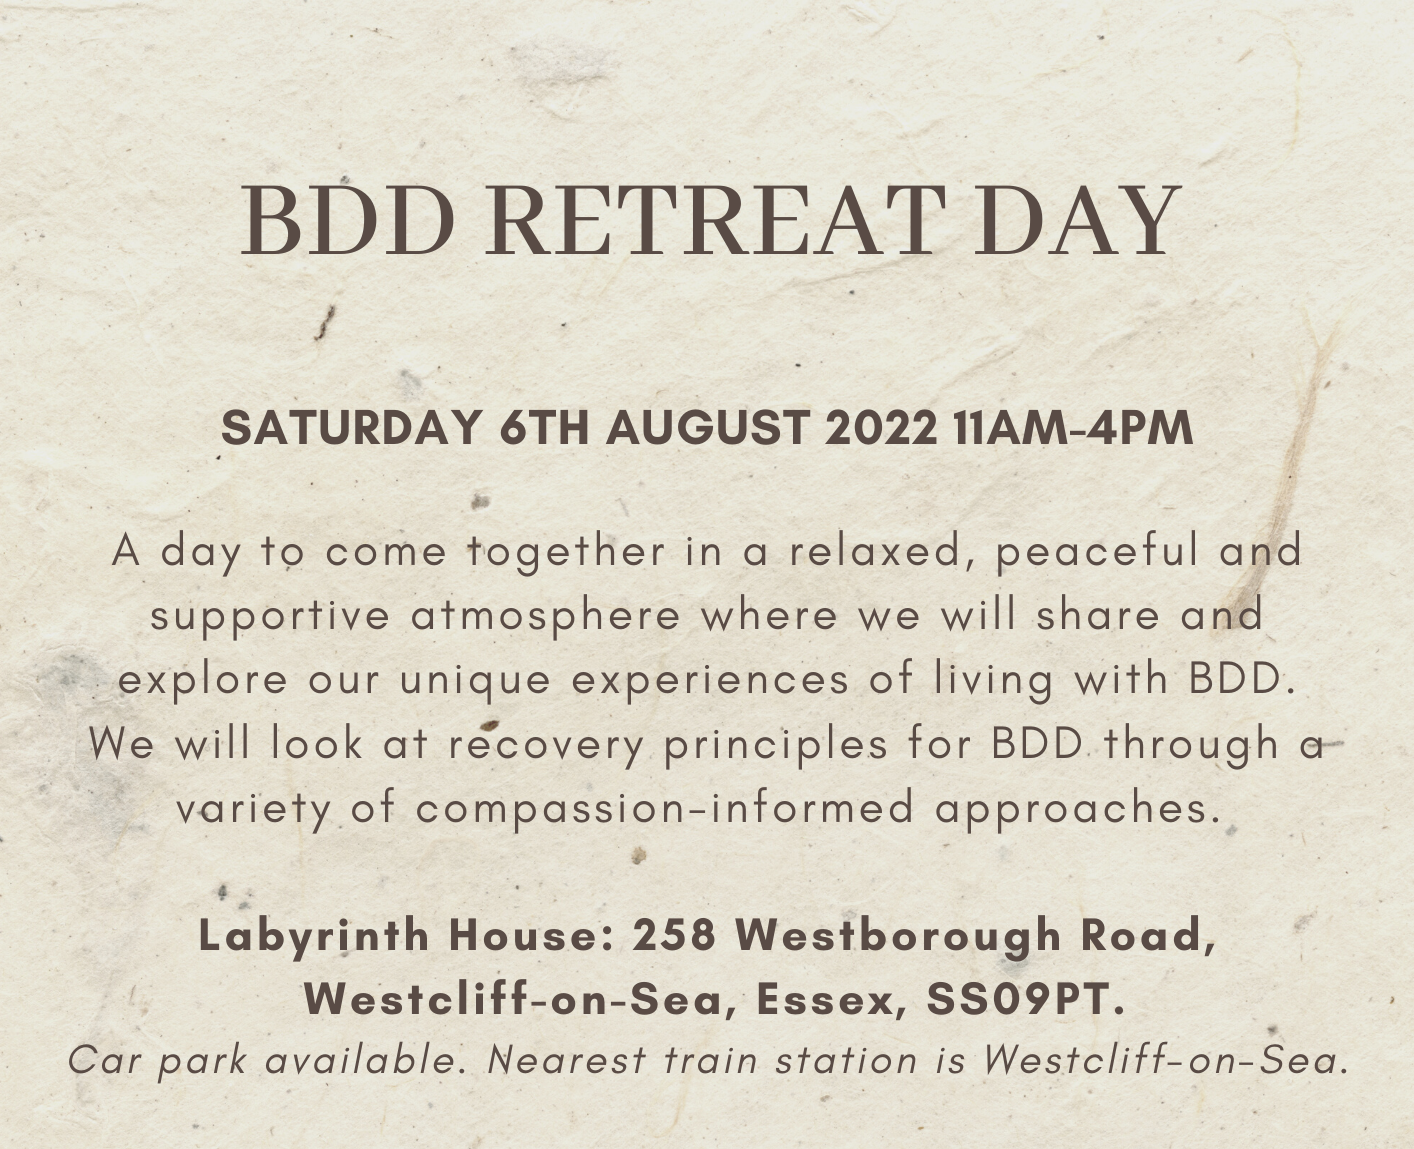 BDD Retreat Day – 12 places available